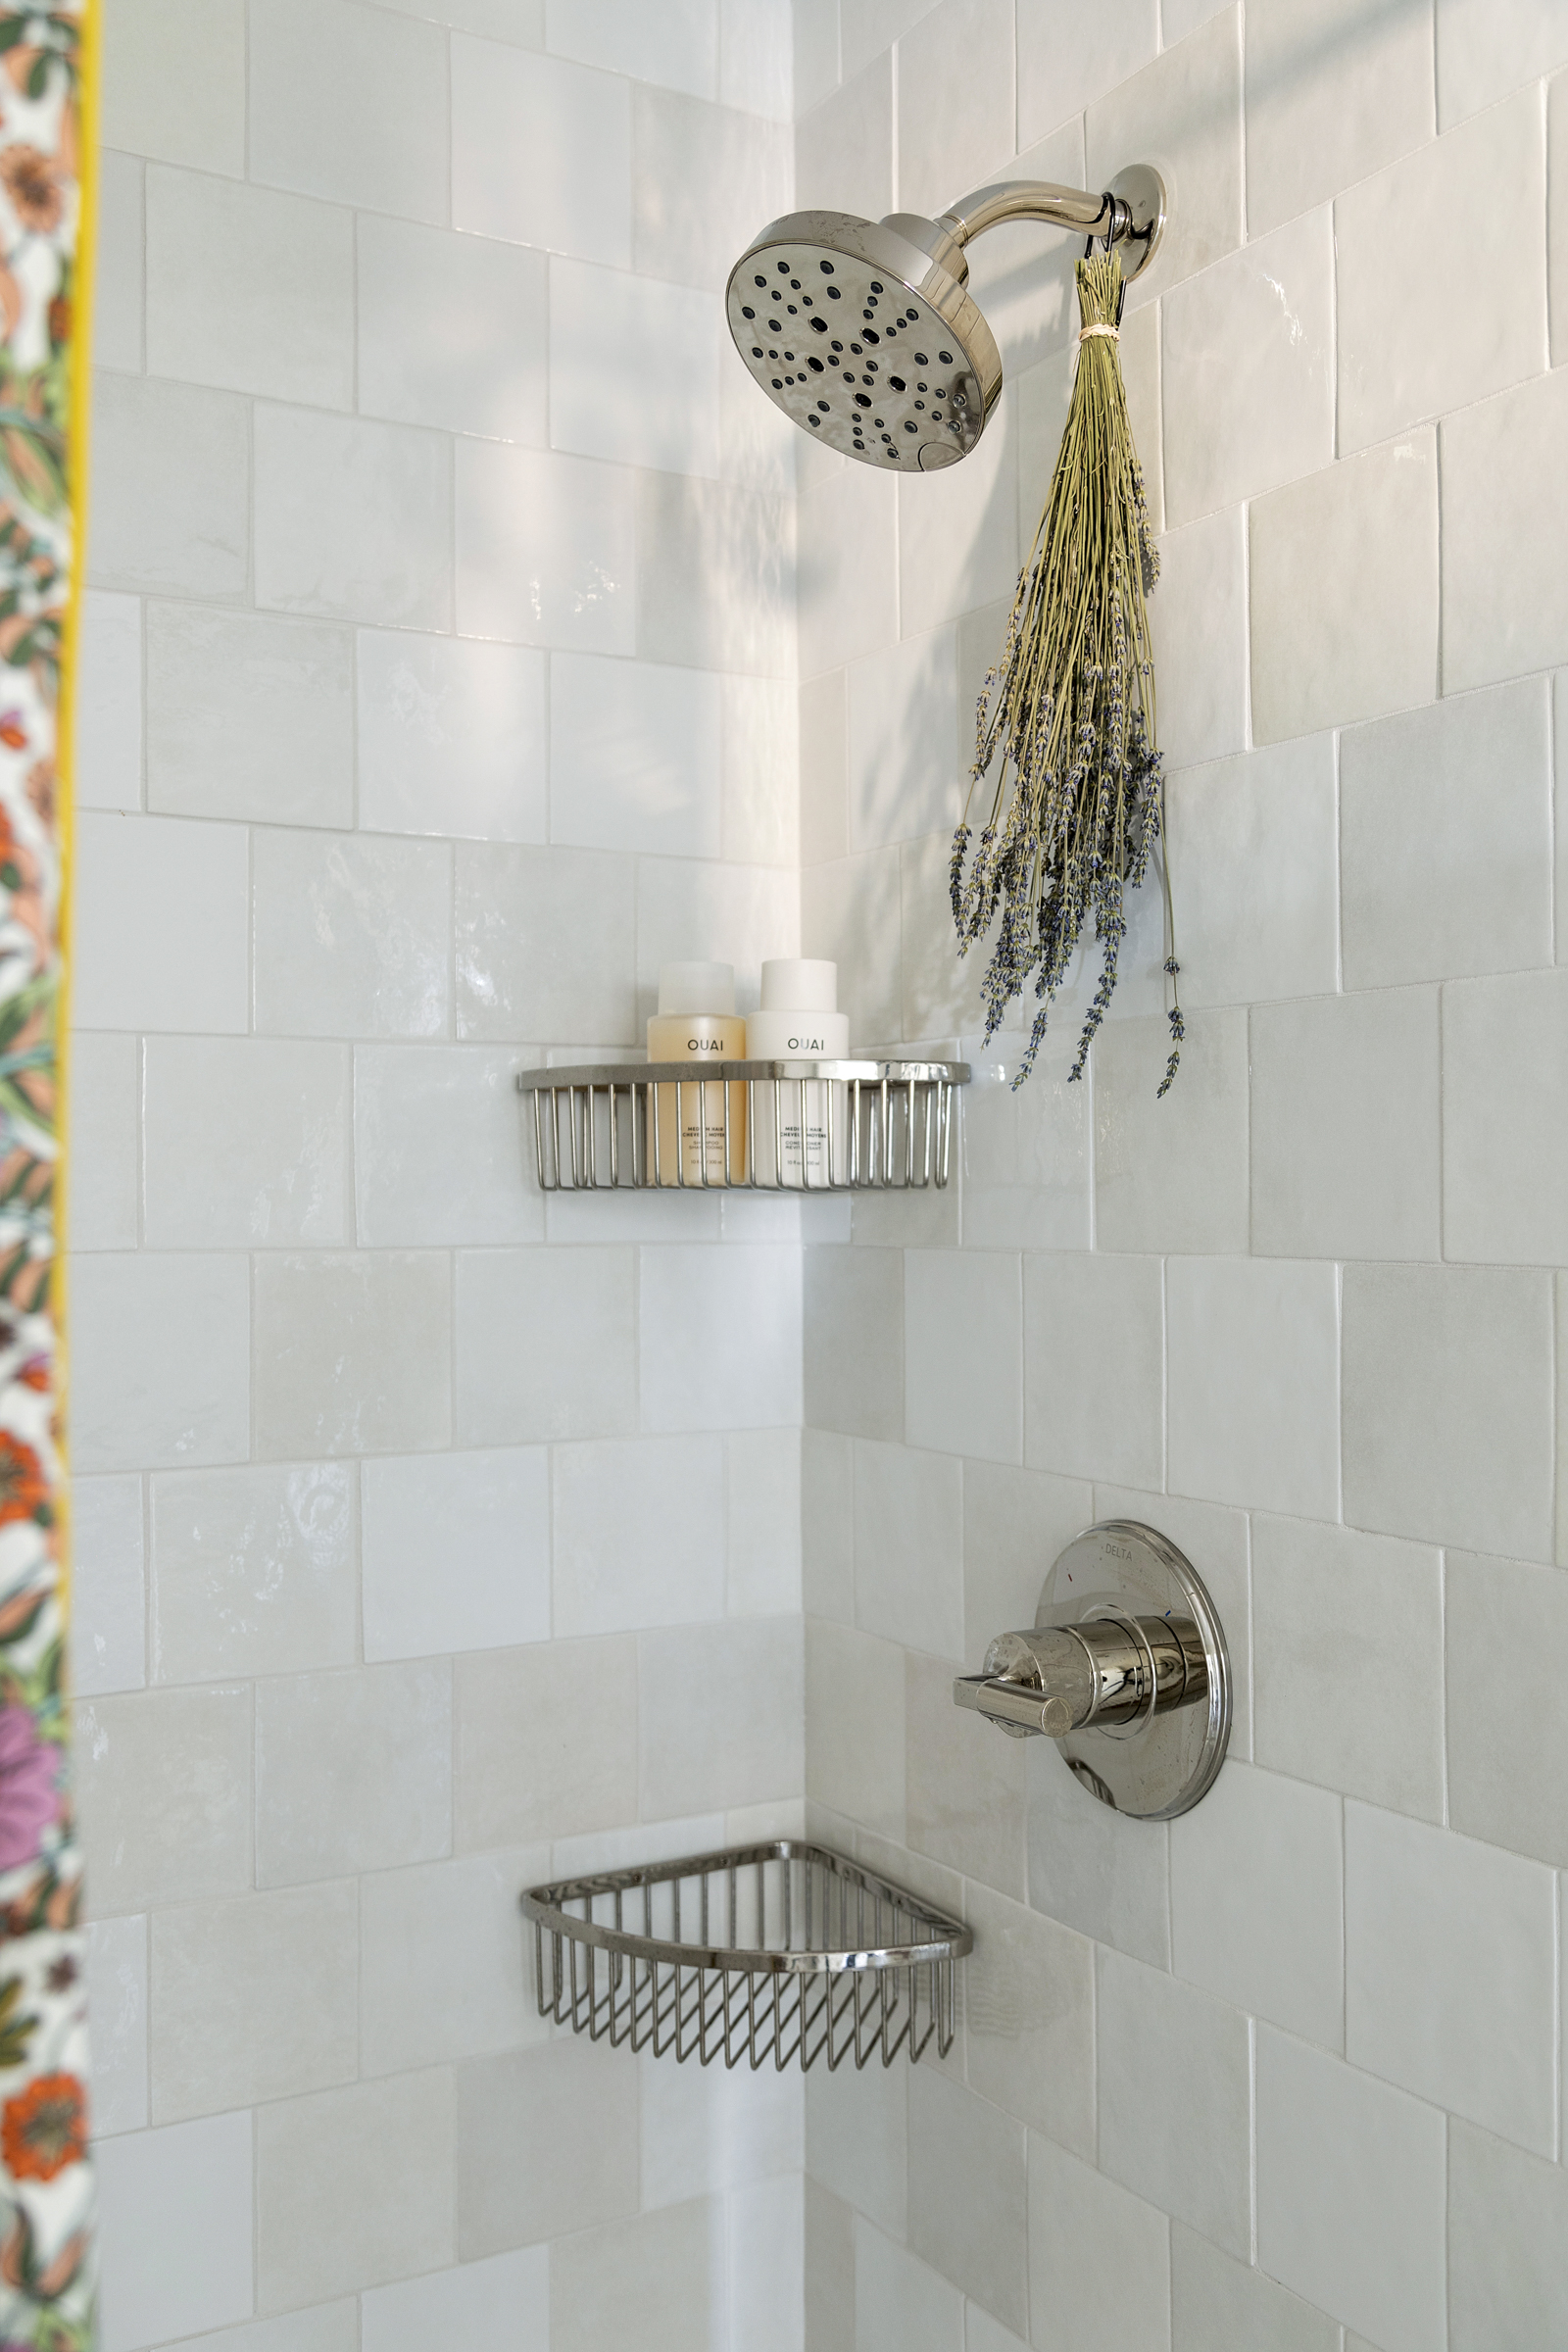 Off-white shower tile, brickiest. Polished nickel plumbing and accessories.